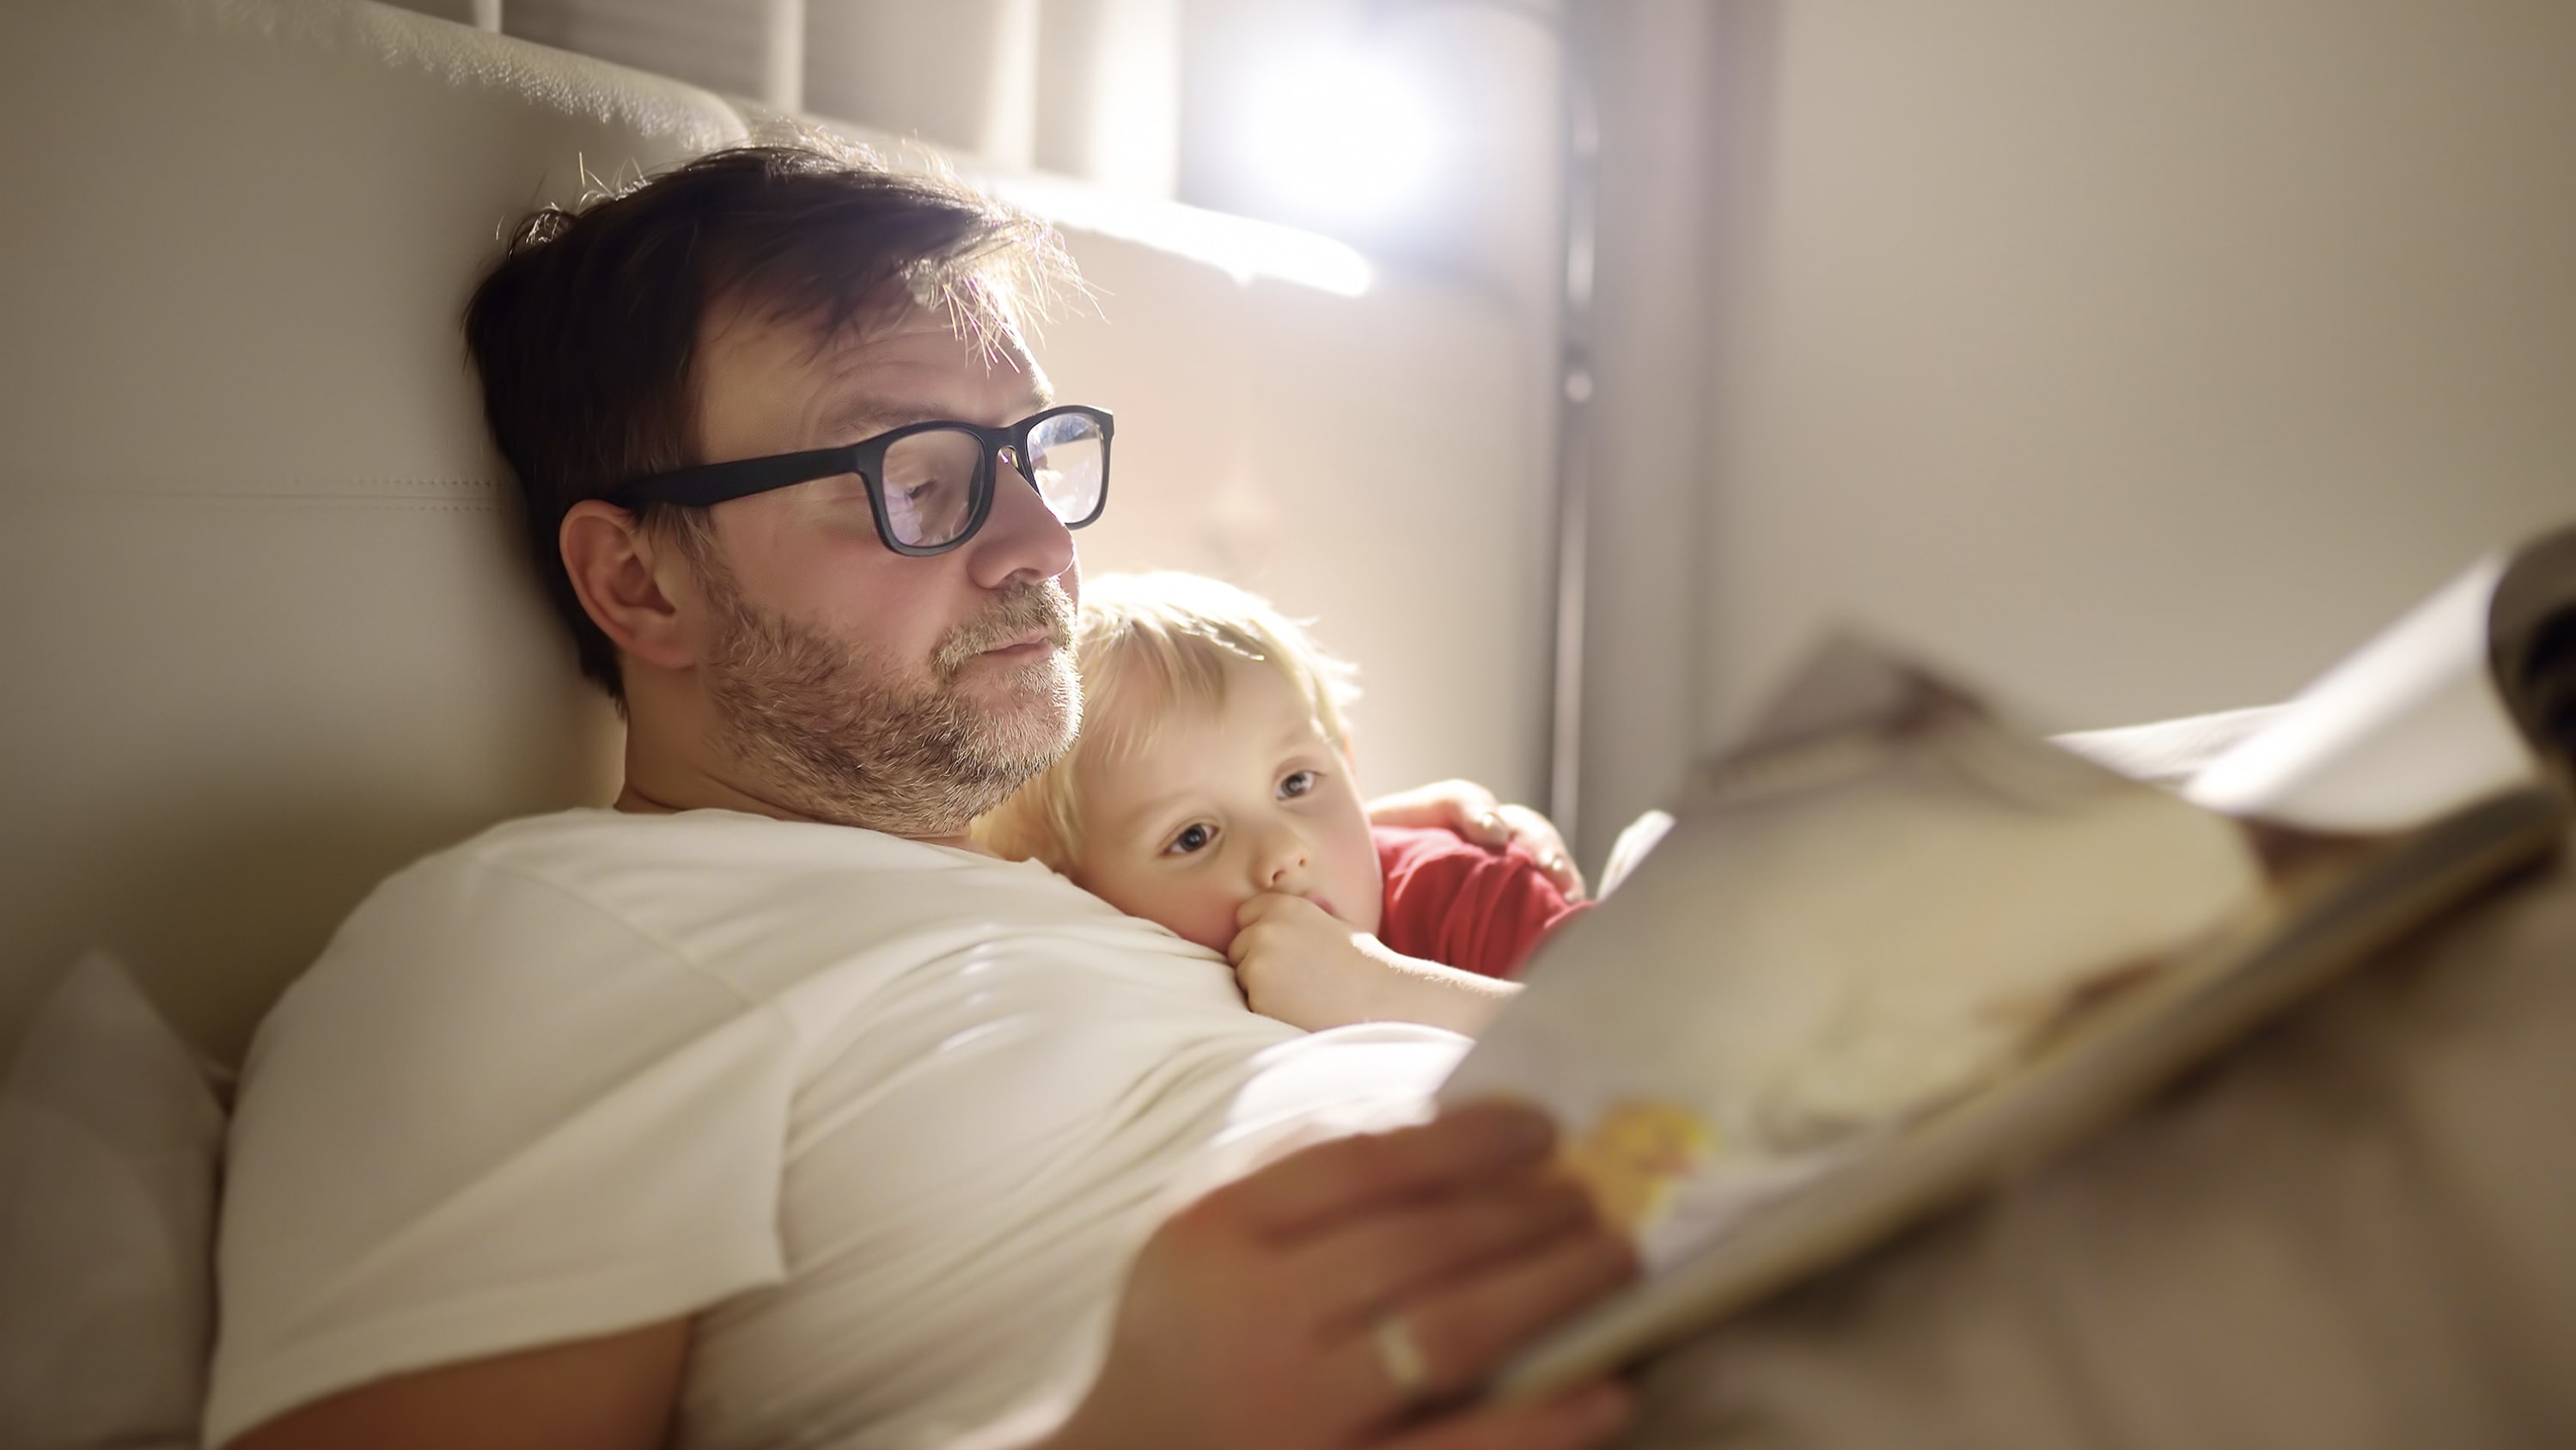 man reading with his child, unaware of his potential risk for HPV-associated oropharyngeal cancer